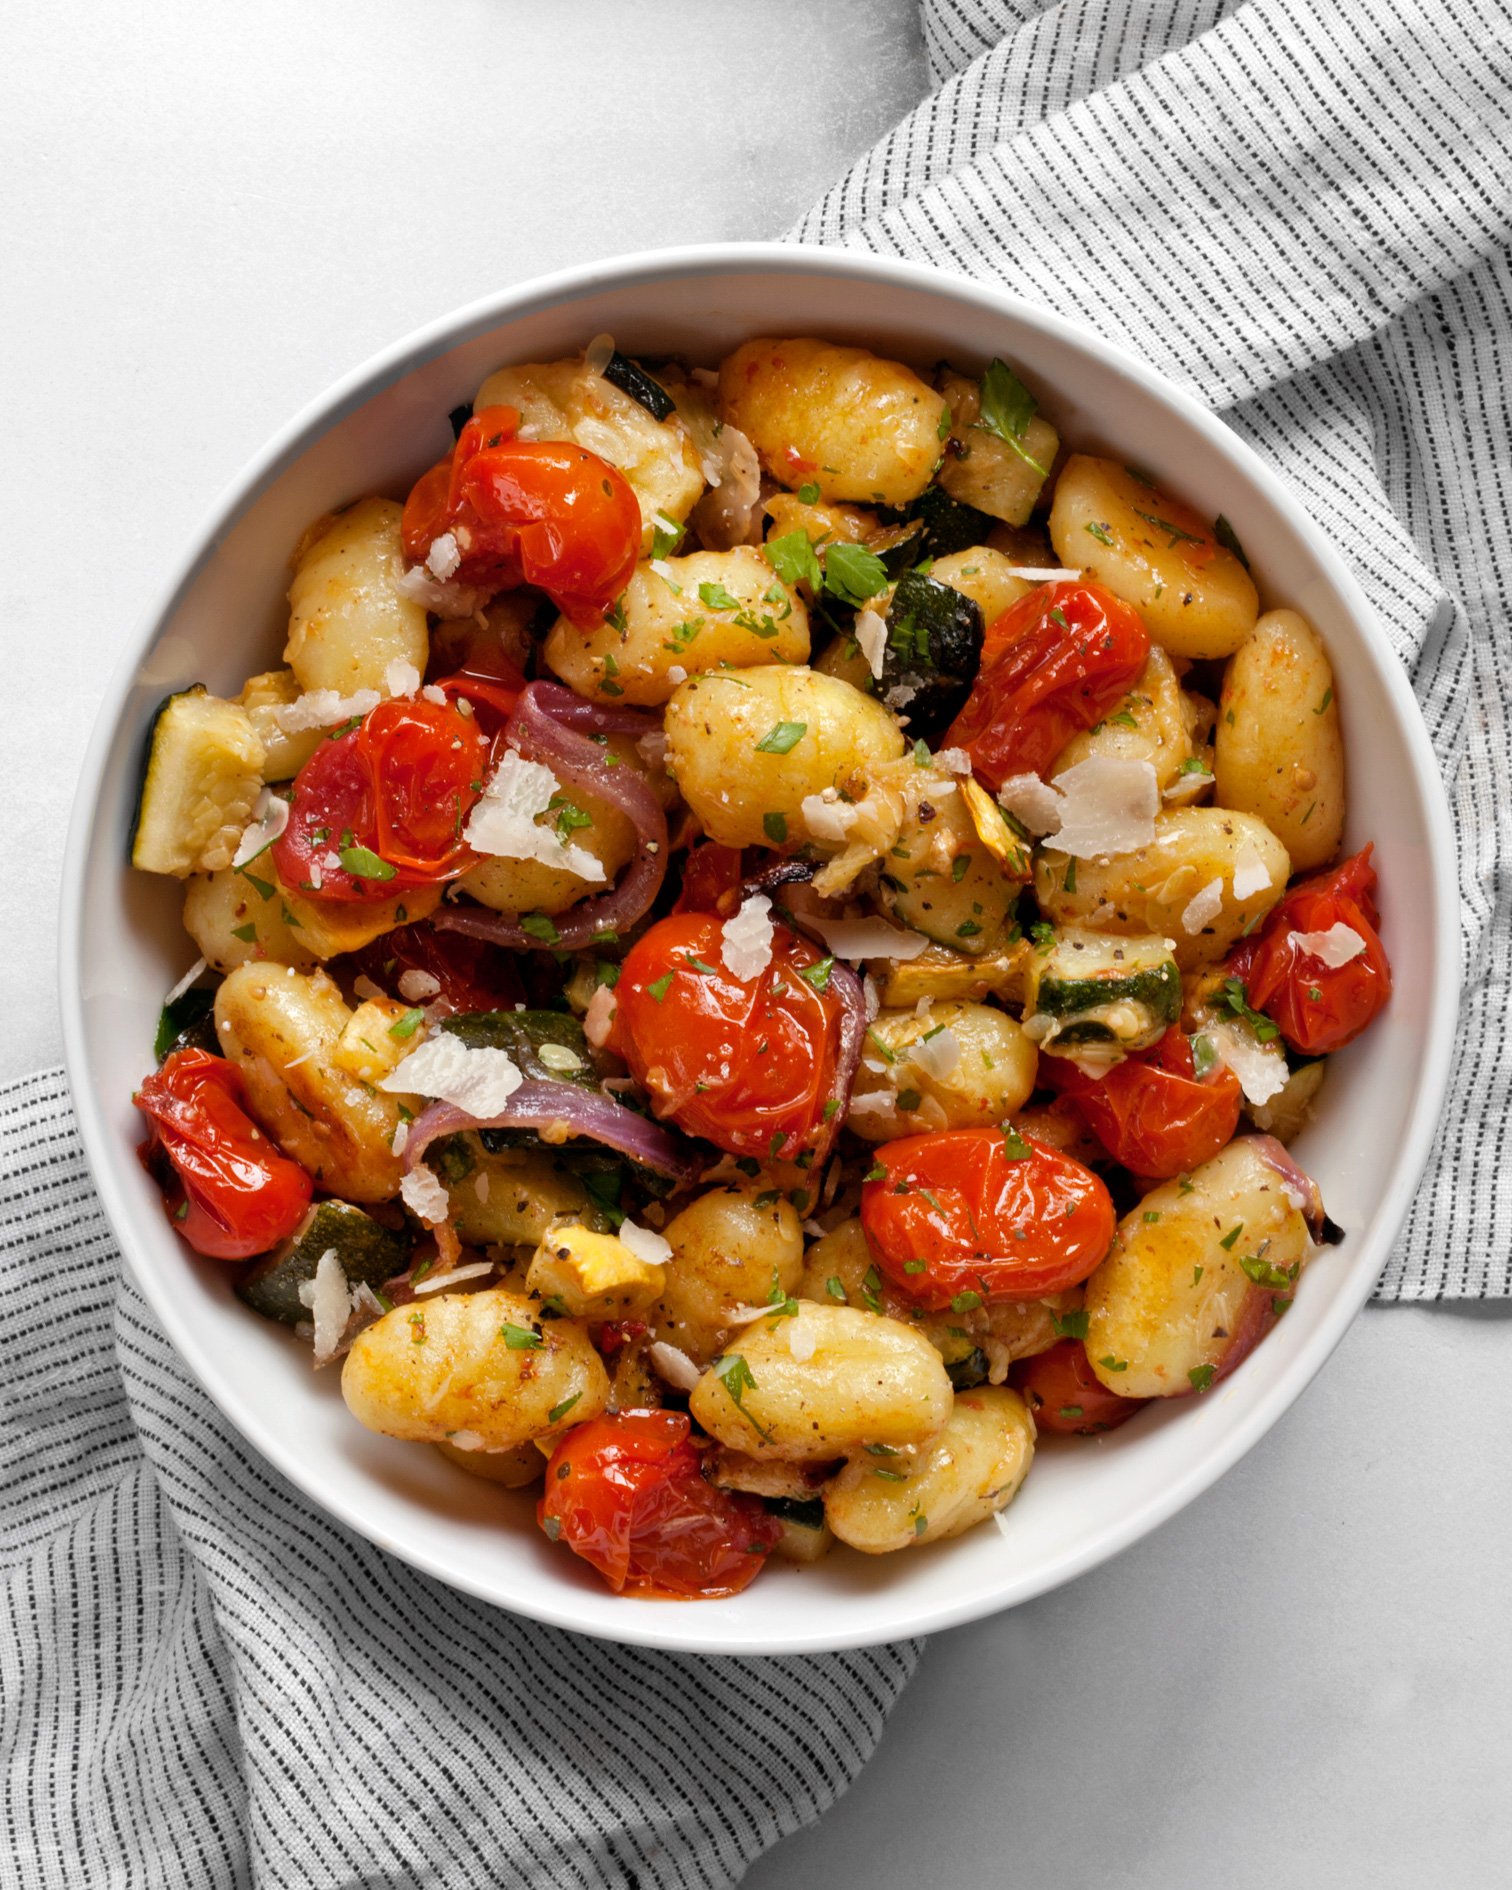 Sheet pan gnocchi with roasted vegetables in a bowl.